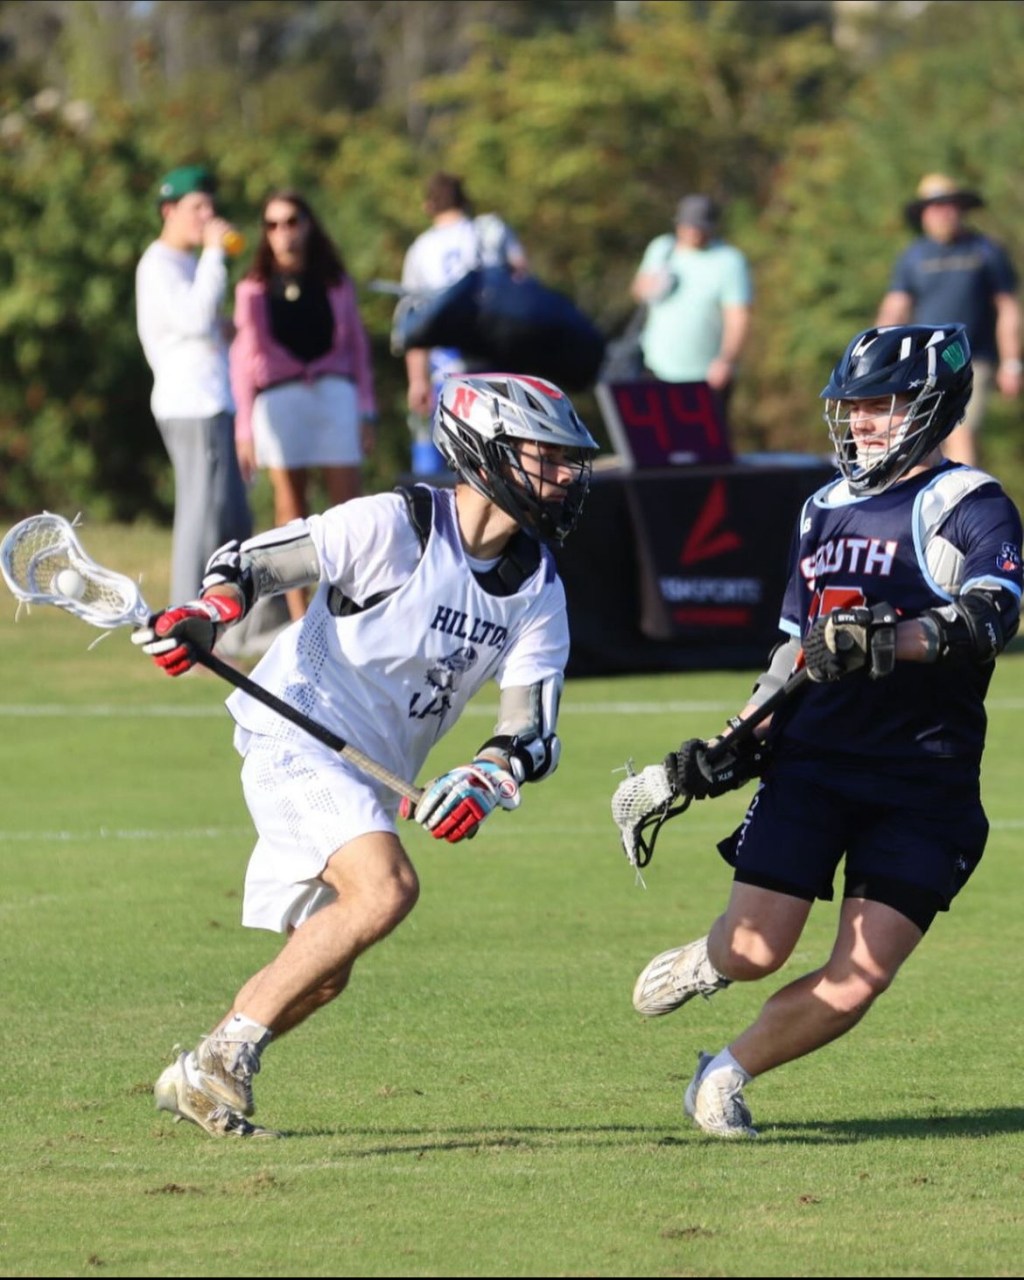 IMLCA Players Summit &#8217;25s: Hilltop, Hotbeds &#038; Uncommitted Talent